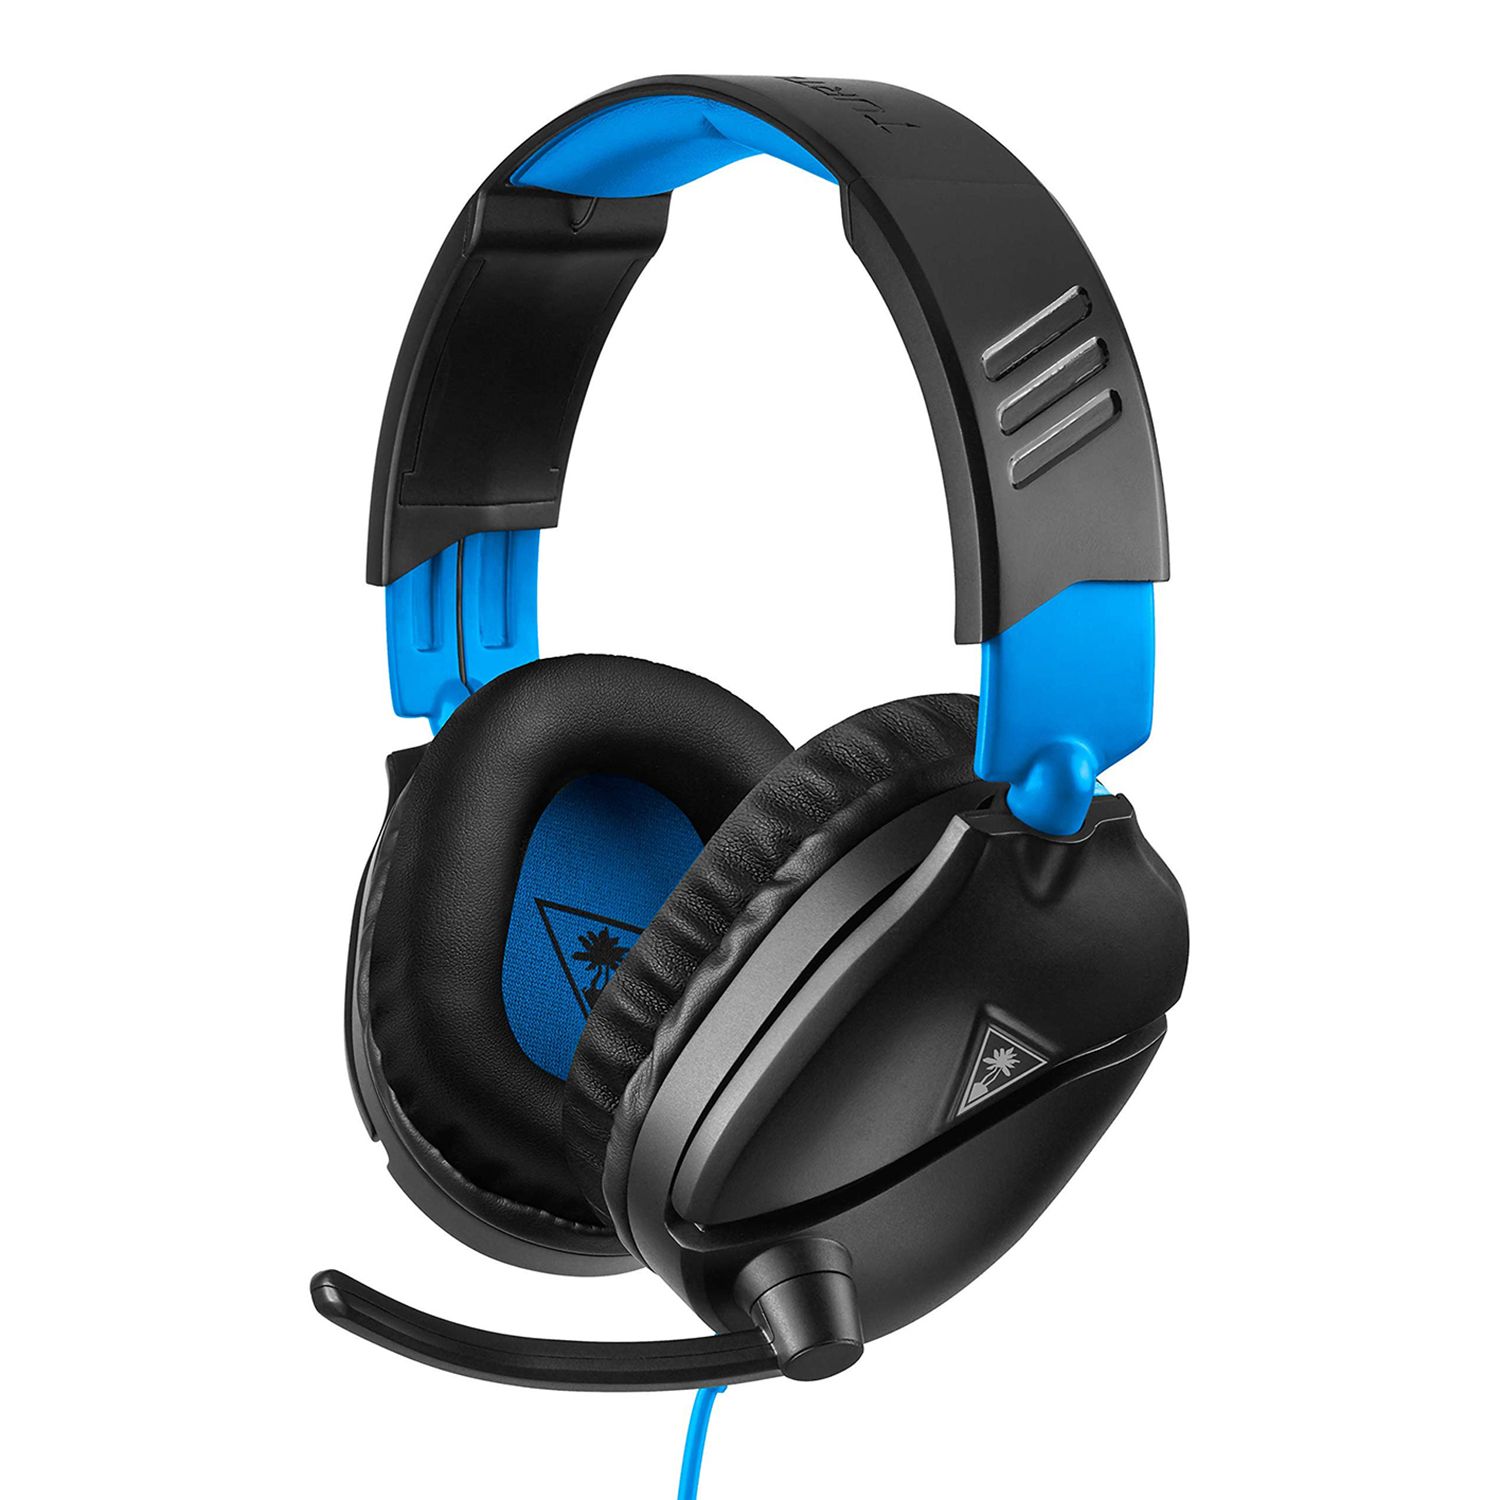 headphones for playstation 4